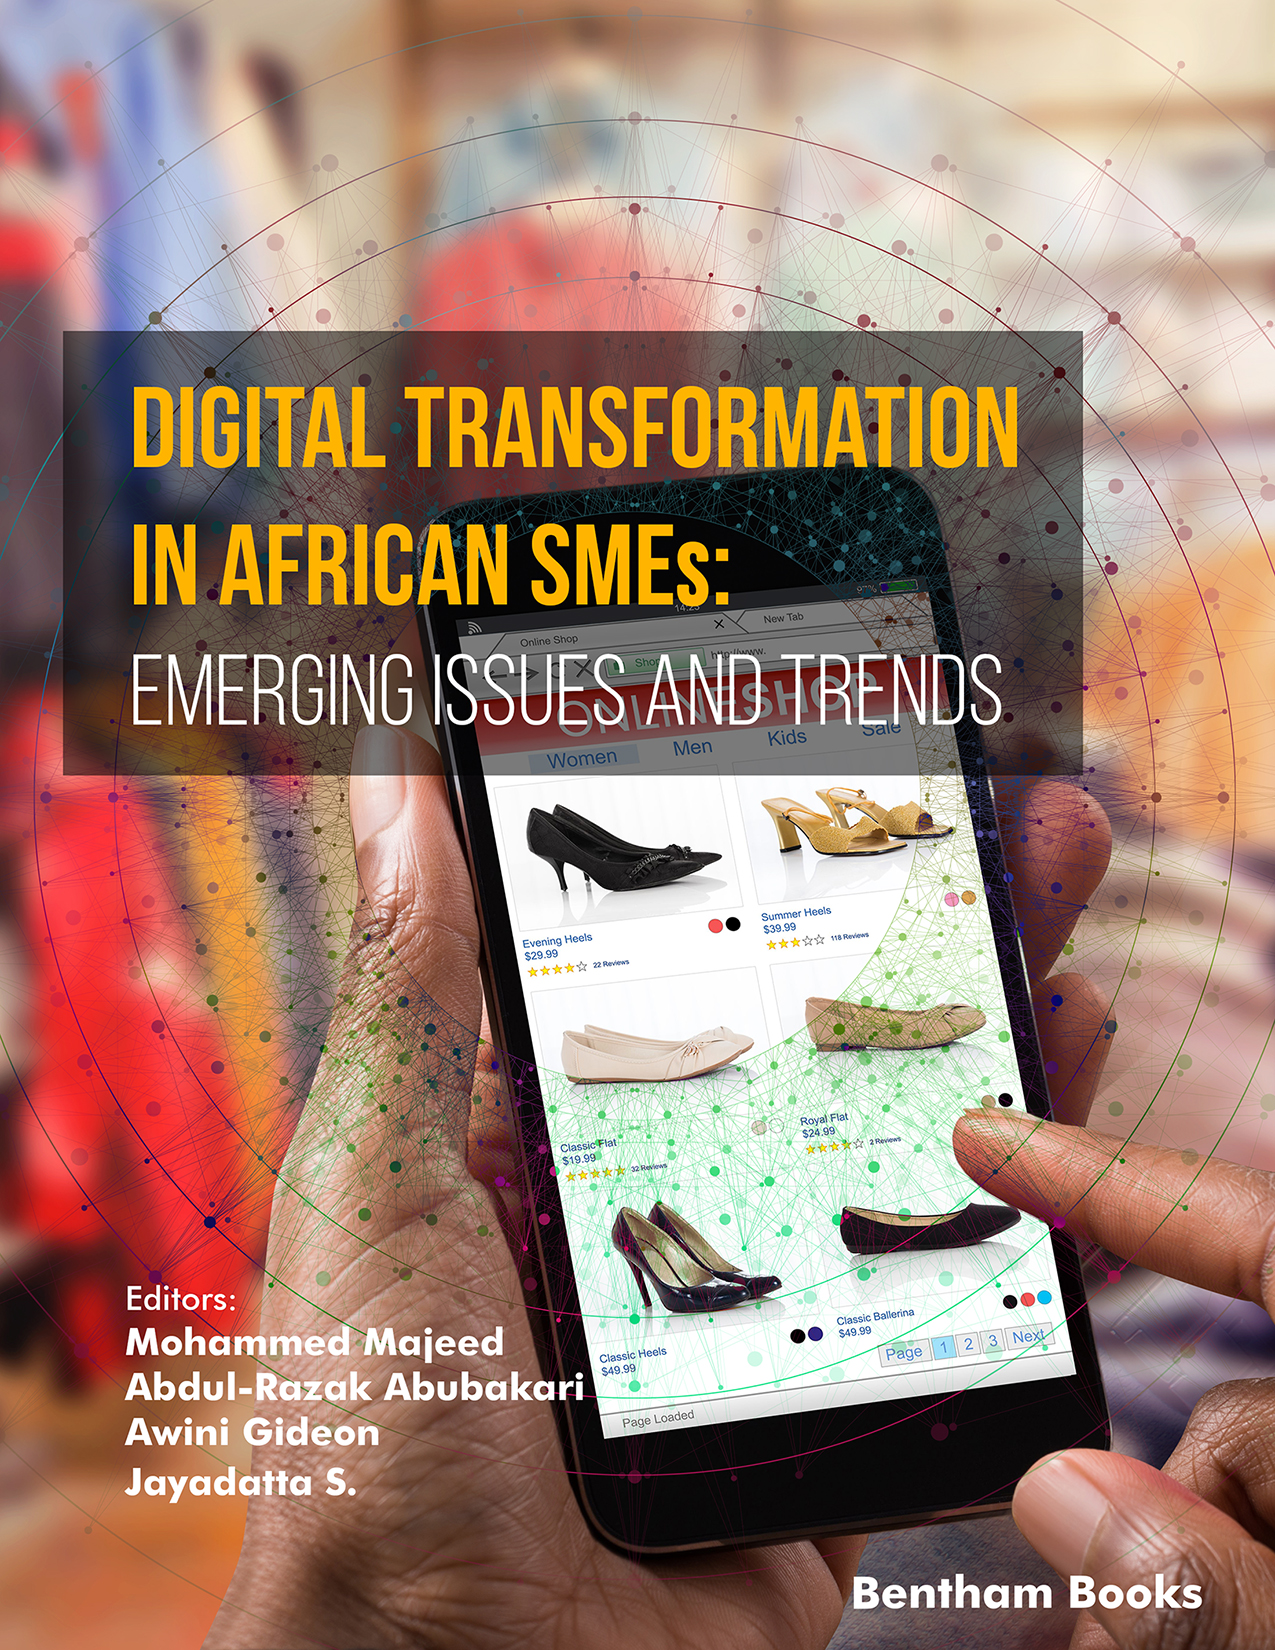 Digital Transformation in African SMEs: Emerging Issues and Trends